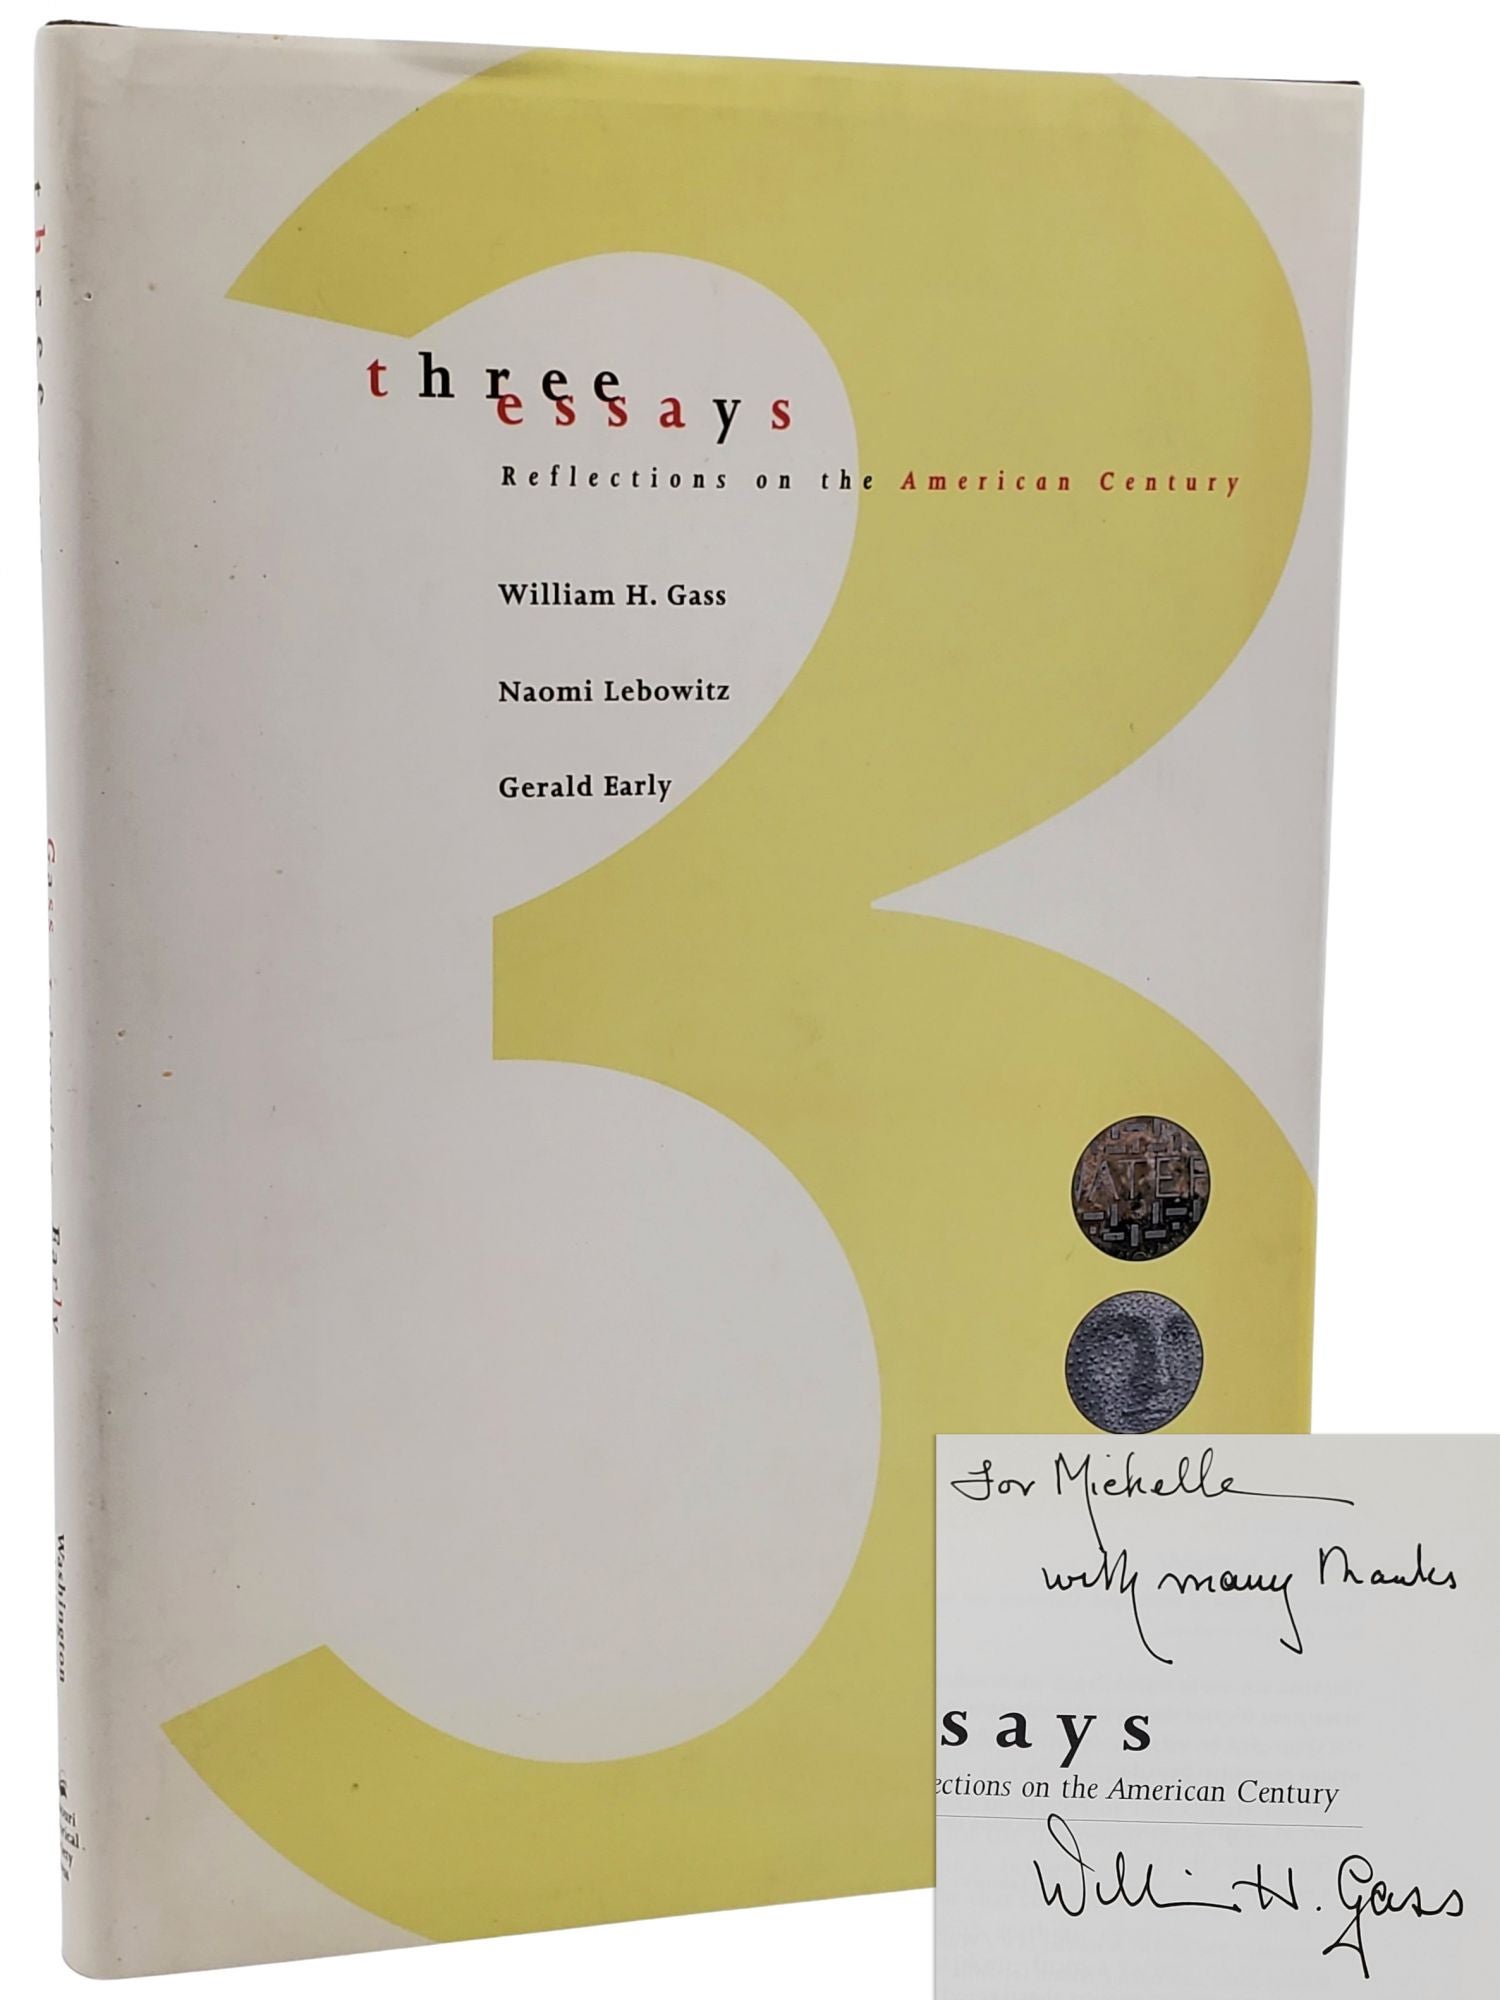 [Book #50554] THREE (3) ESSAYS: REFLECTIONS ON THE AMERICAN CENTURY (SIGNED). William H. Gass, Naomi Lebowitz, Gerald Early, Patrick Schuchard, ron, Denise Ward-Brown.